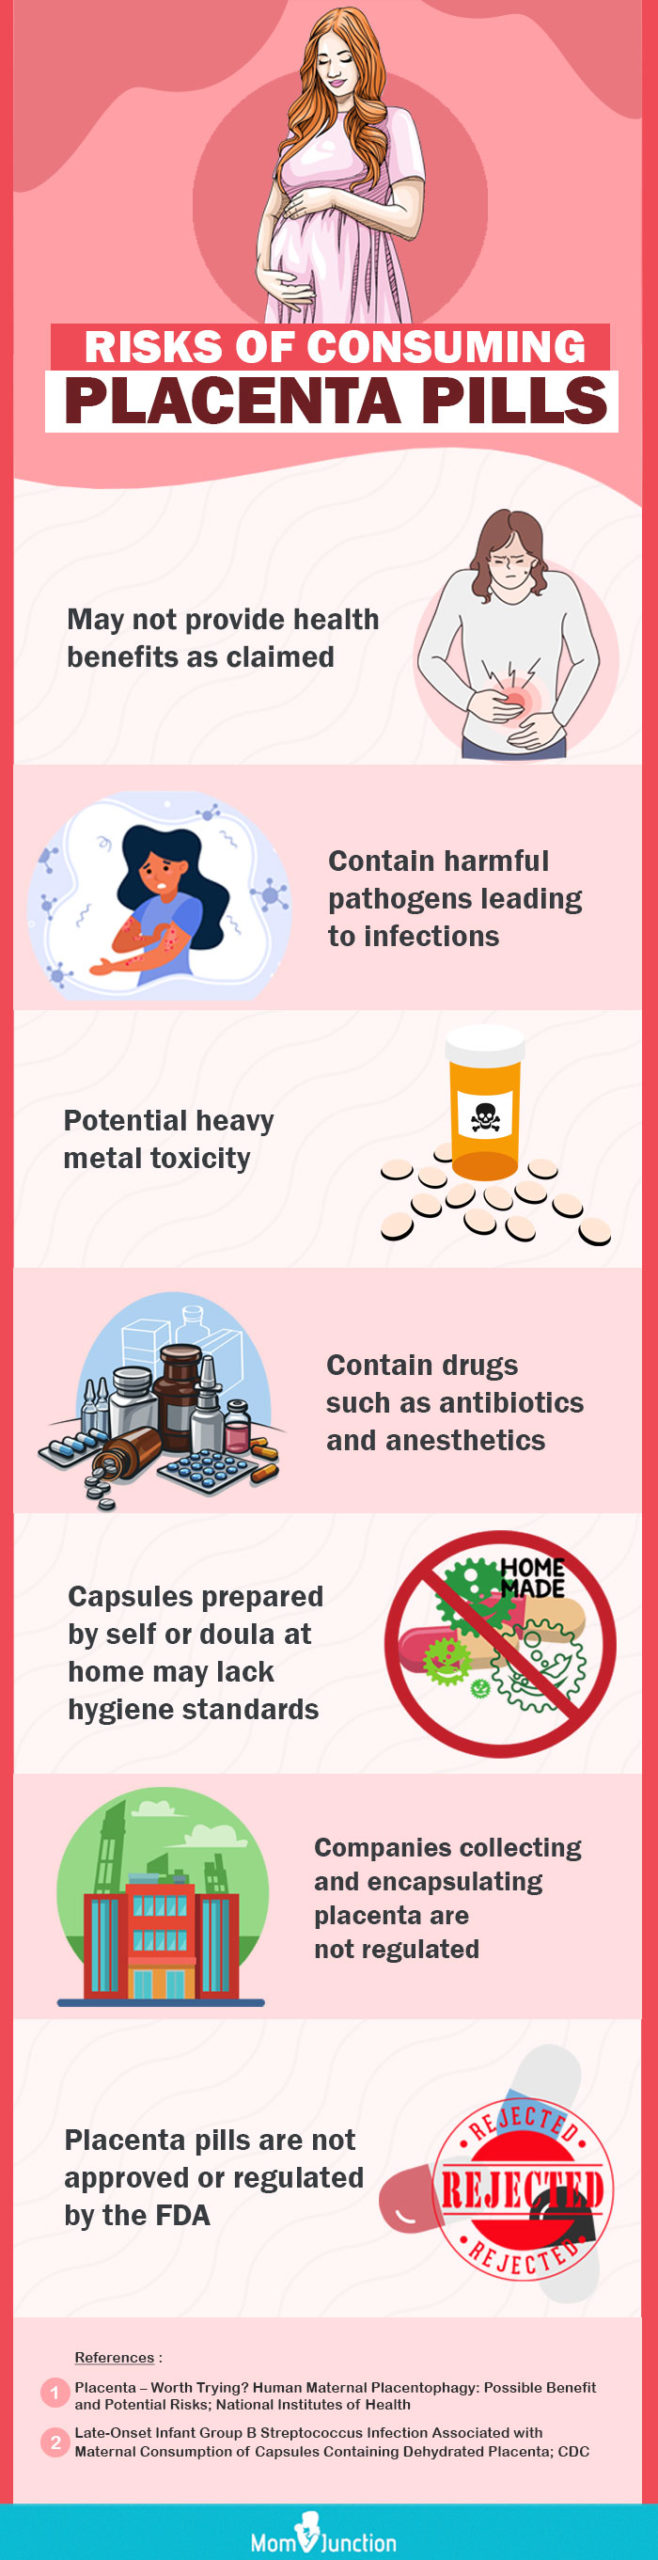 risks of consuming placenta pill [infographic]